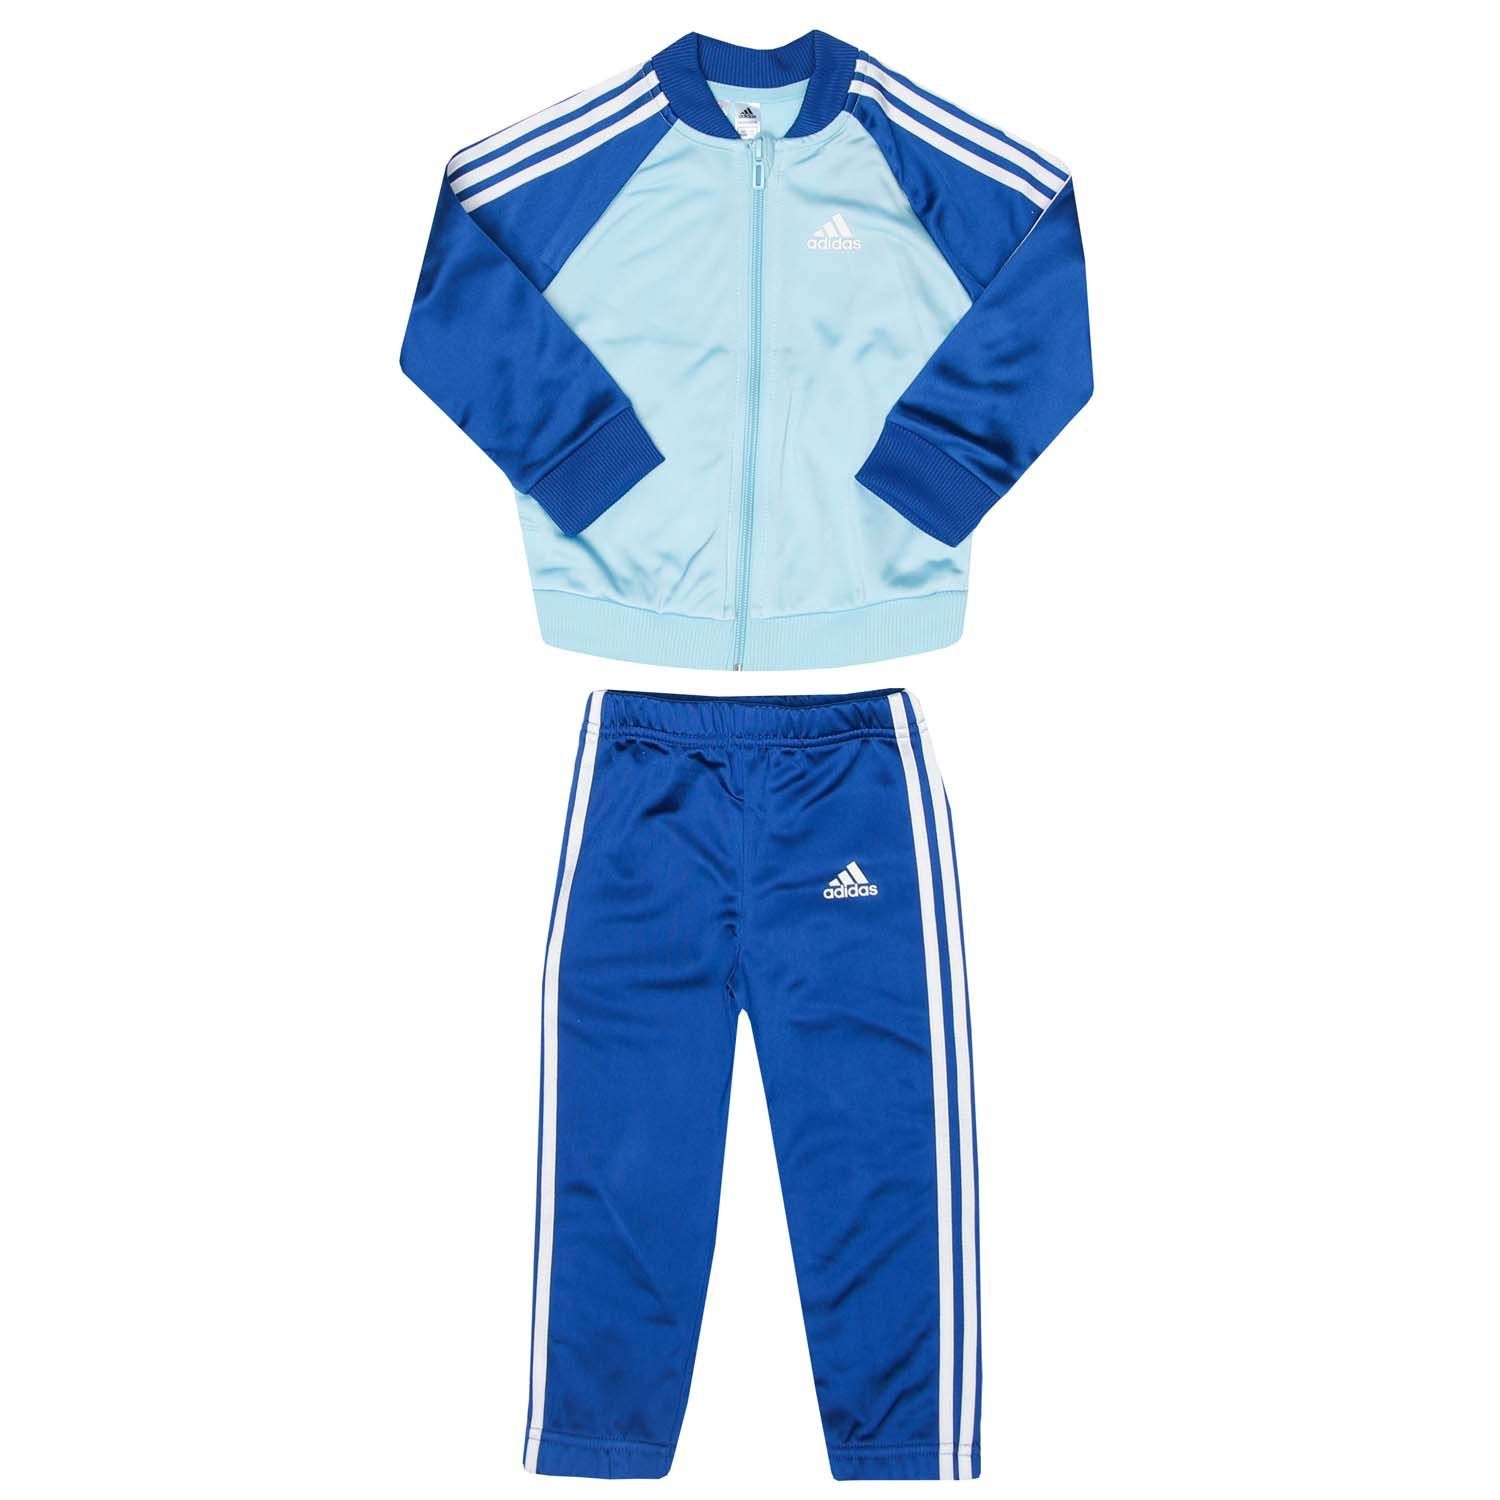 Baby adidas 3- Stripes Tricot Tracksuit in sky white.- Jacket:- Stand-up collar.- Full zip fastening.- Side slip-in pockets.- adidas logo on the chest.- Colourblock.- Regular fit.- Main material: 100% Polyester (Recycled).  Machine washable. - Pants:- Mid-rise elastic waist.- Side slip-in pockets.- adidas logo at left thigh.- Slim fit.- Main material: 100% Polyester (Recycled). Machine washable. - Ref: GN3946B